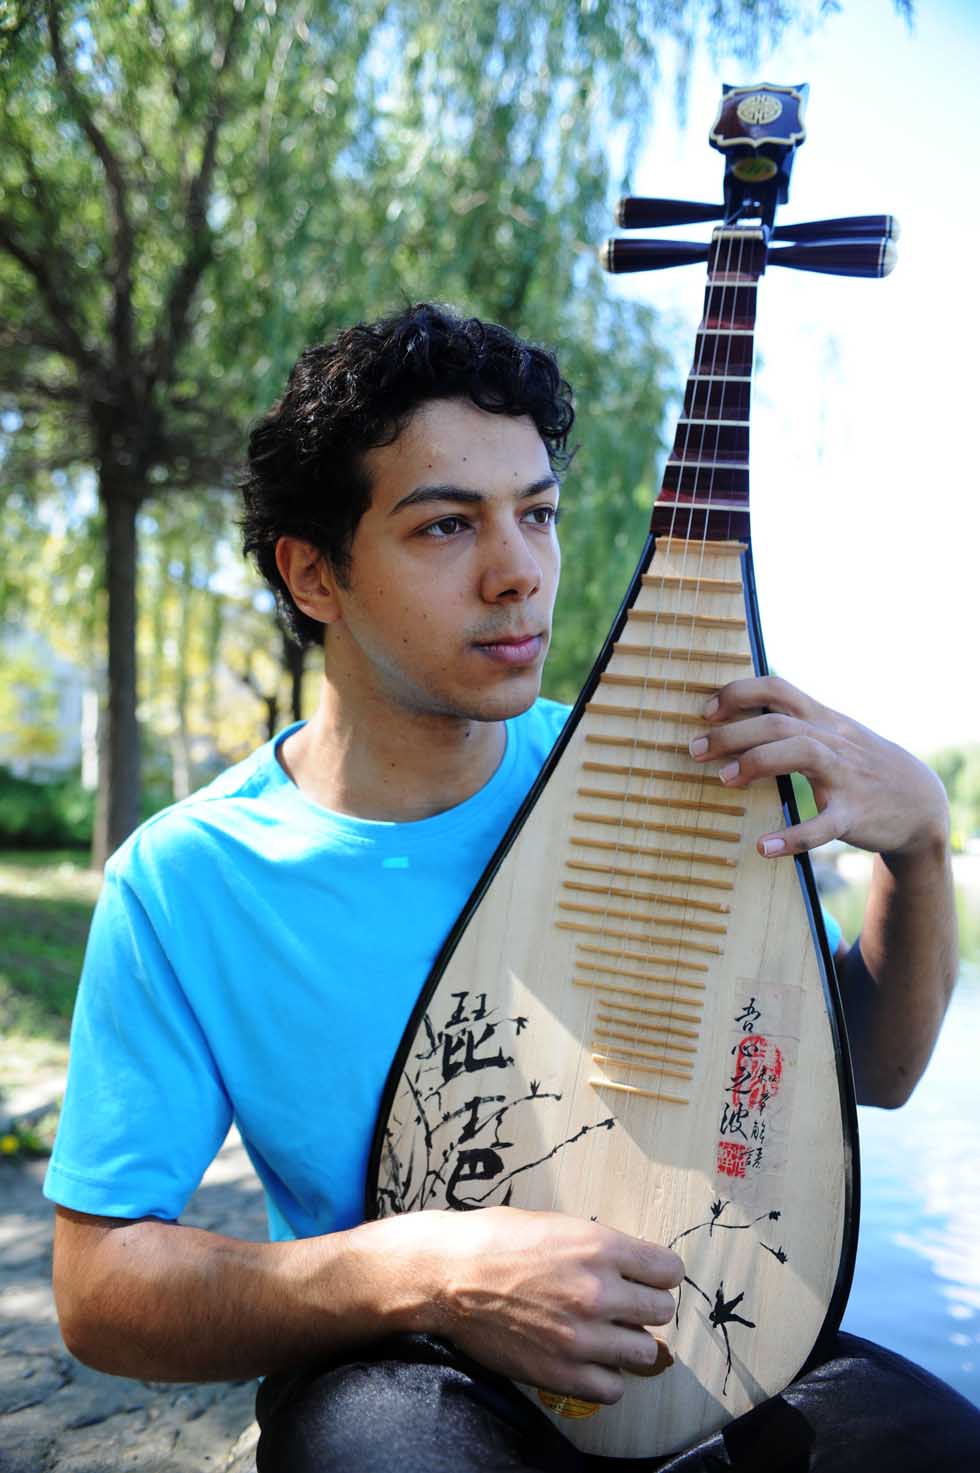 Mustafaal Share'a practices pipa, a four-stringed Chinese musical instrument, at Shenyang Normal University in Shenyang, capital of northeast China's Liaoning Province, Sept. 15, 2012.(Xinhua/Yang Qing) 